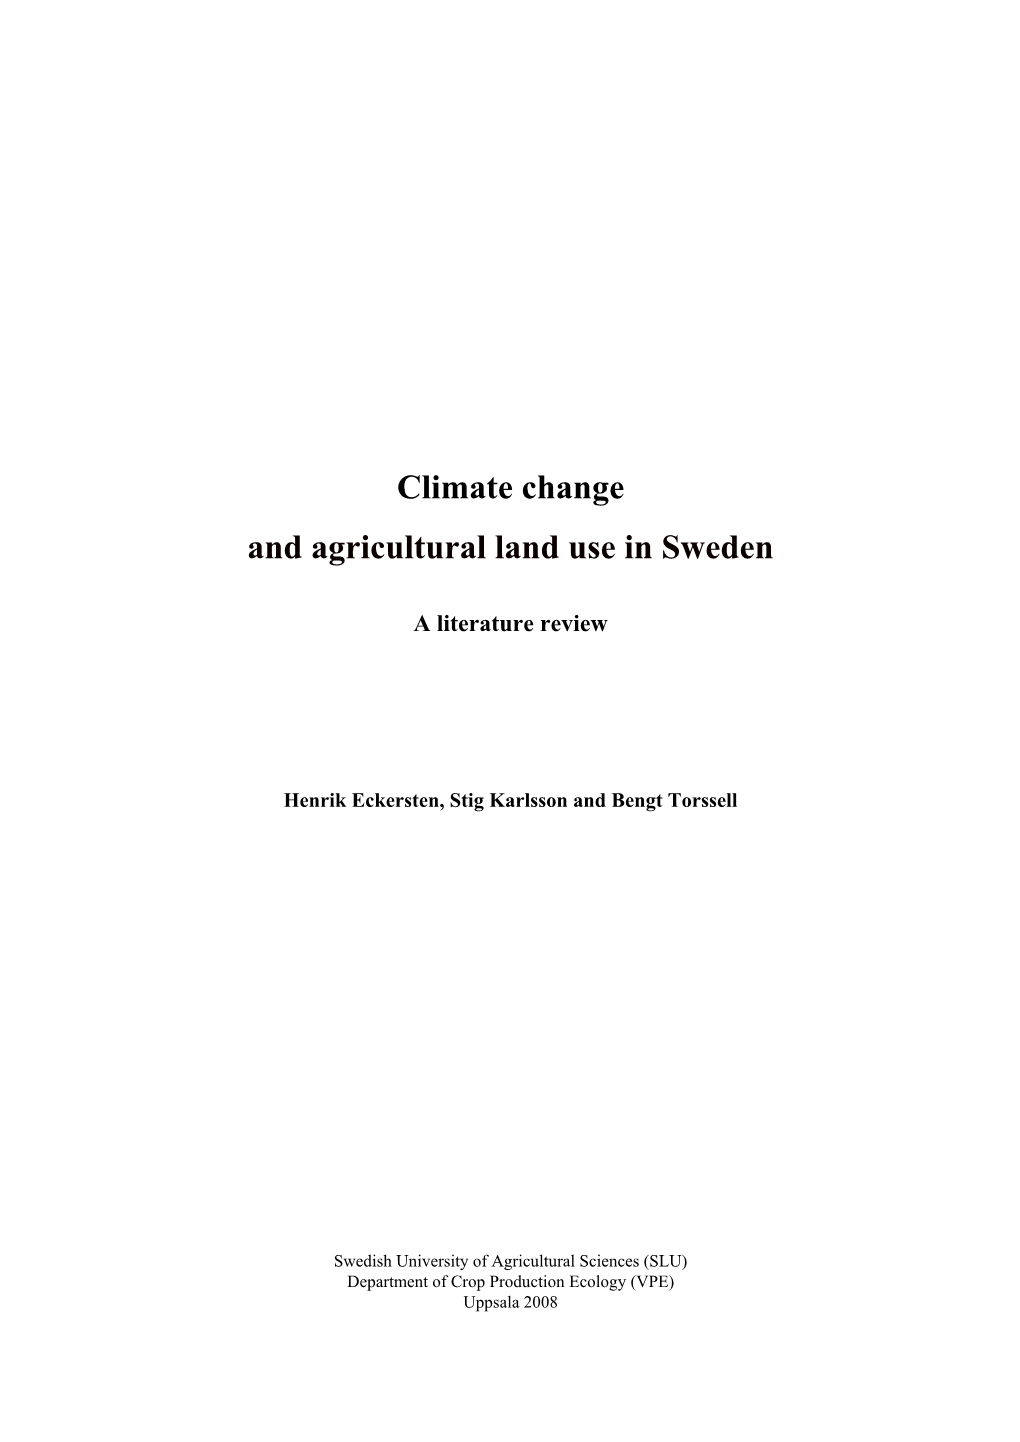 Climate Change and Agricultural Land Use in Sweden